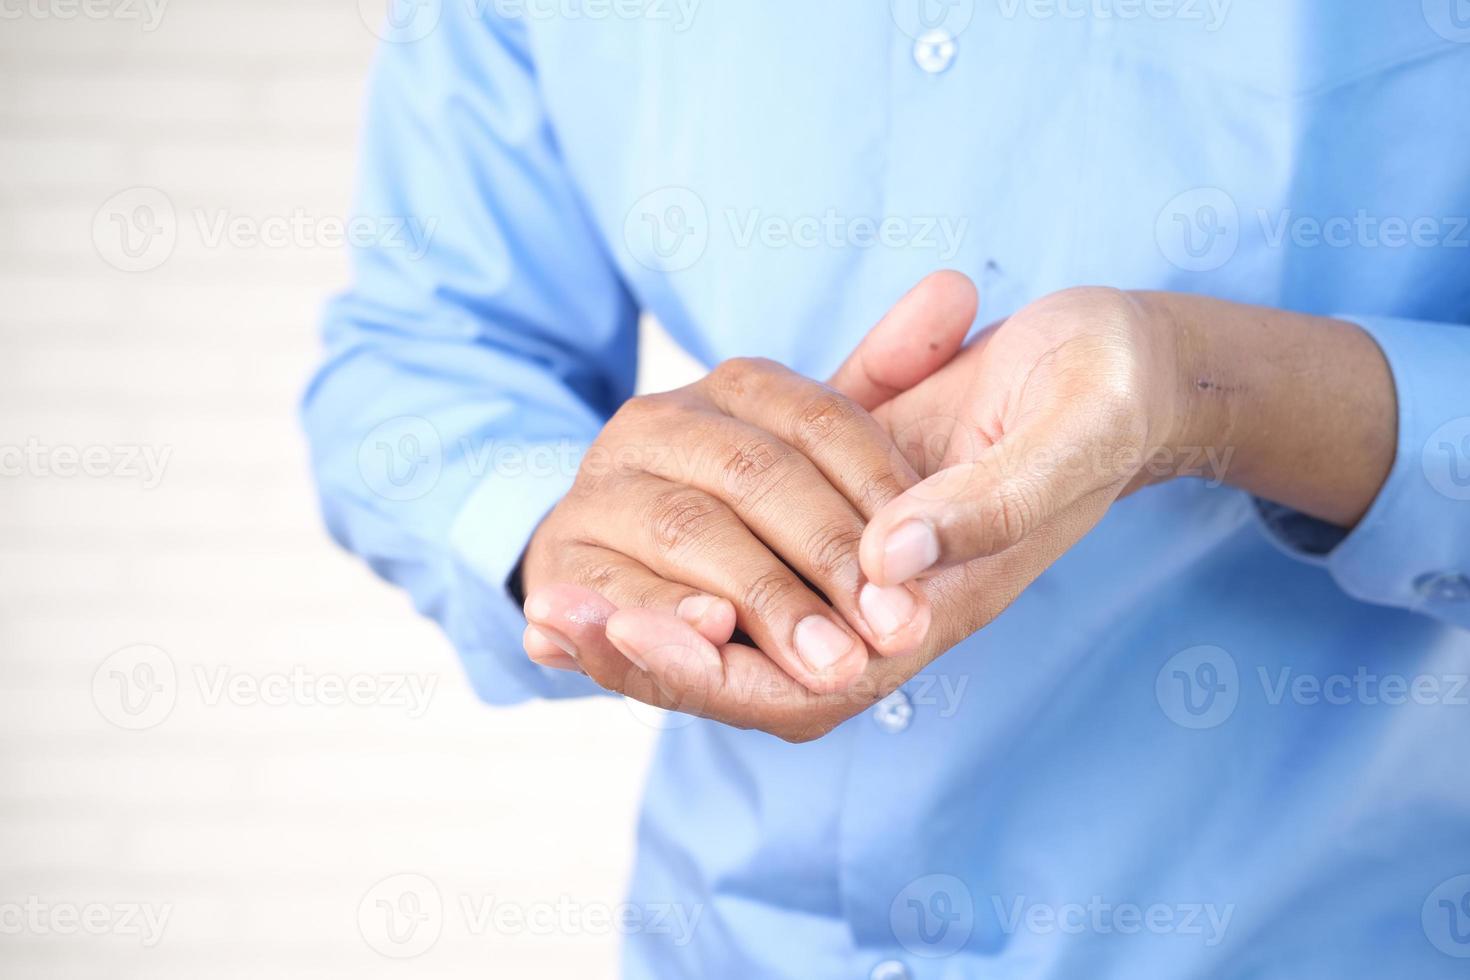 Person using hand sanitizer photo